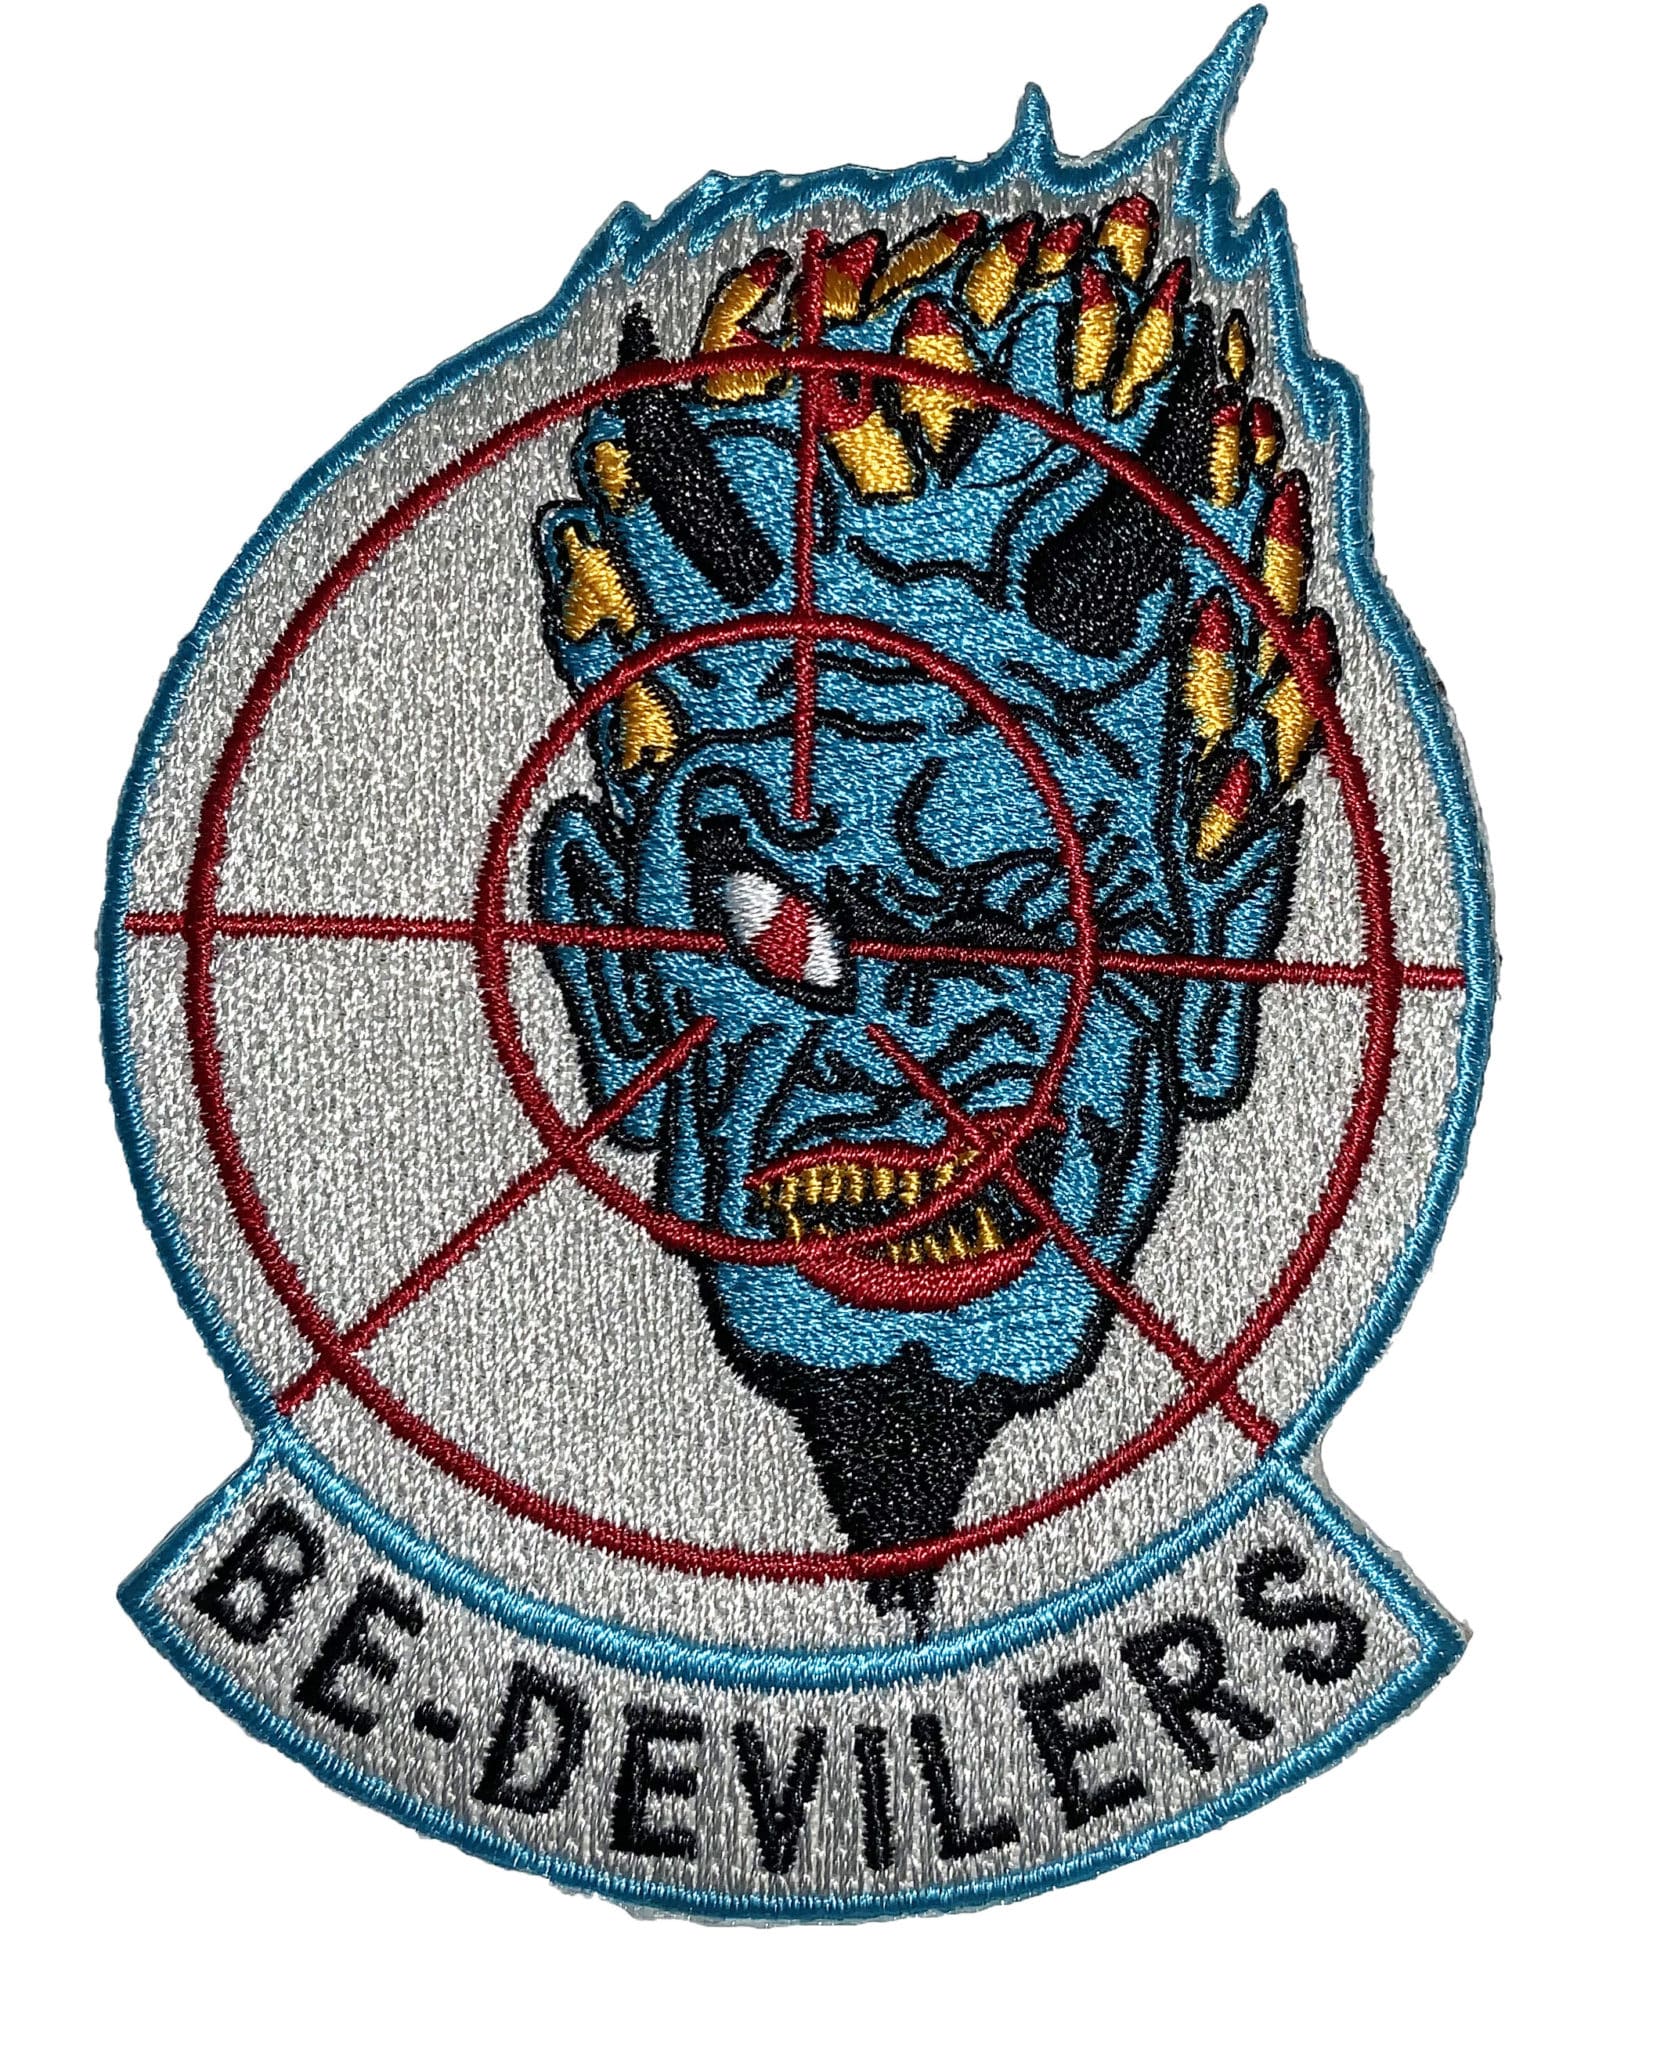 VF-74 Be-Devilers Squadron Patch – Sew On